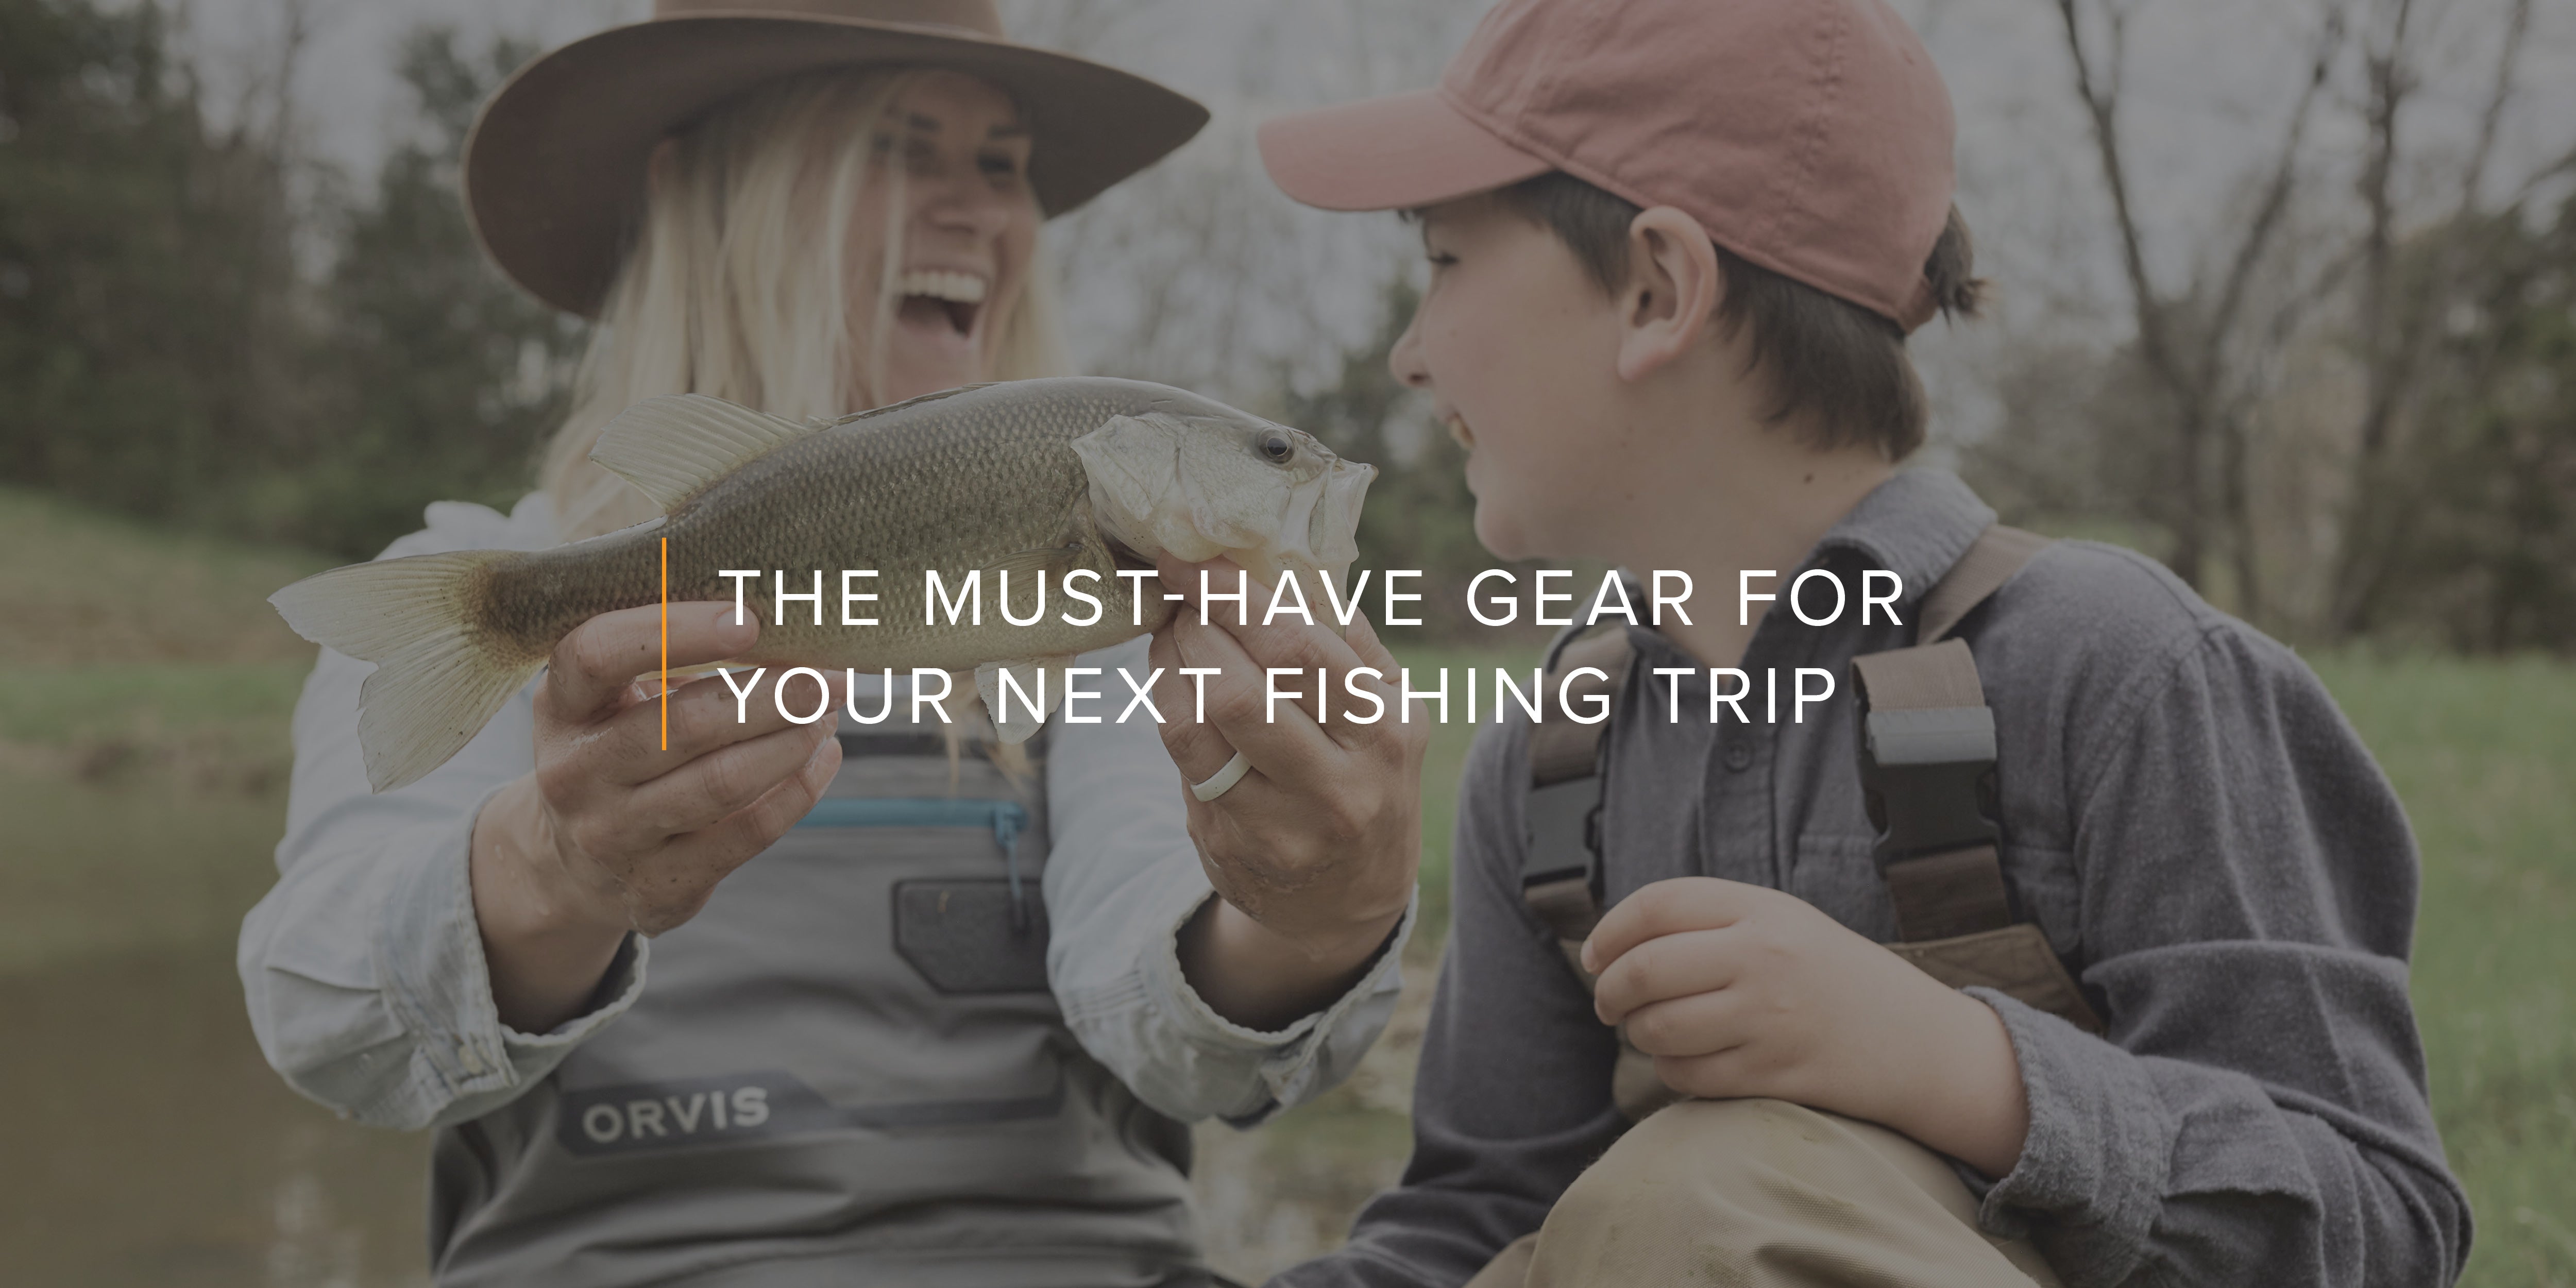 The Must-Have Gear for Your Next Fishing Trip